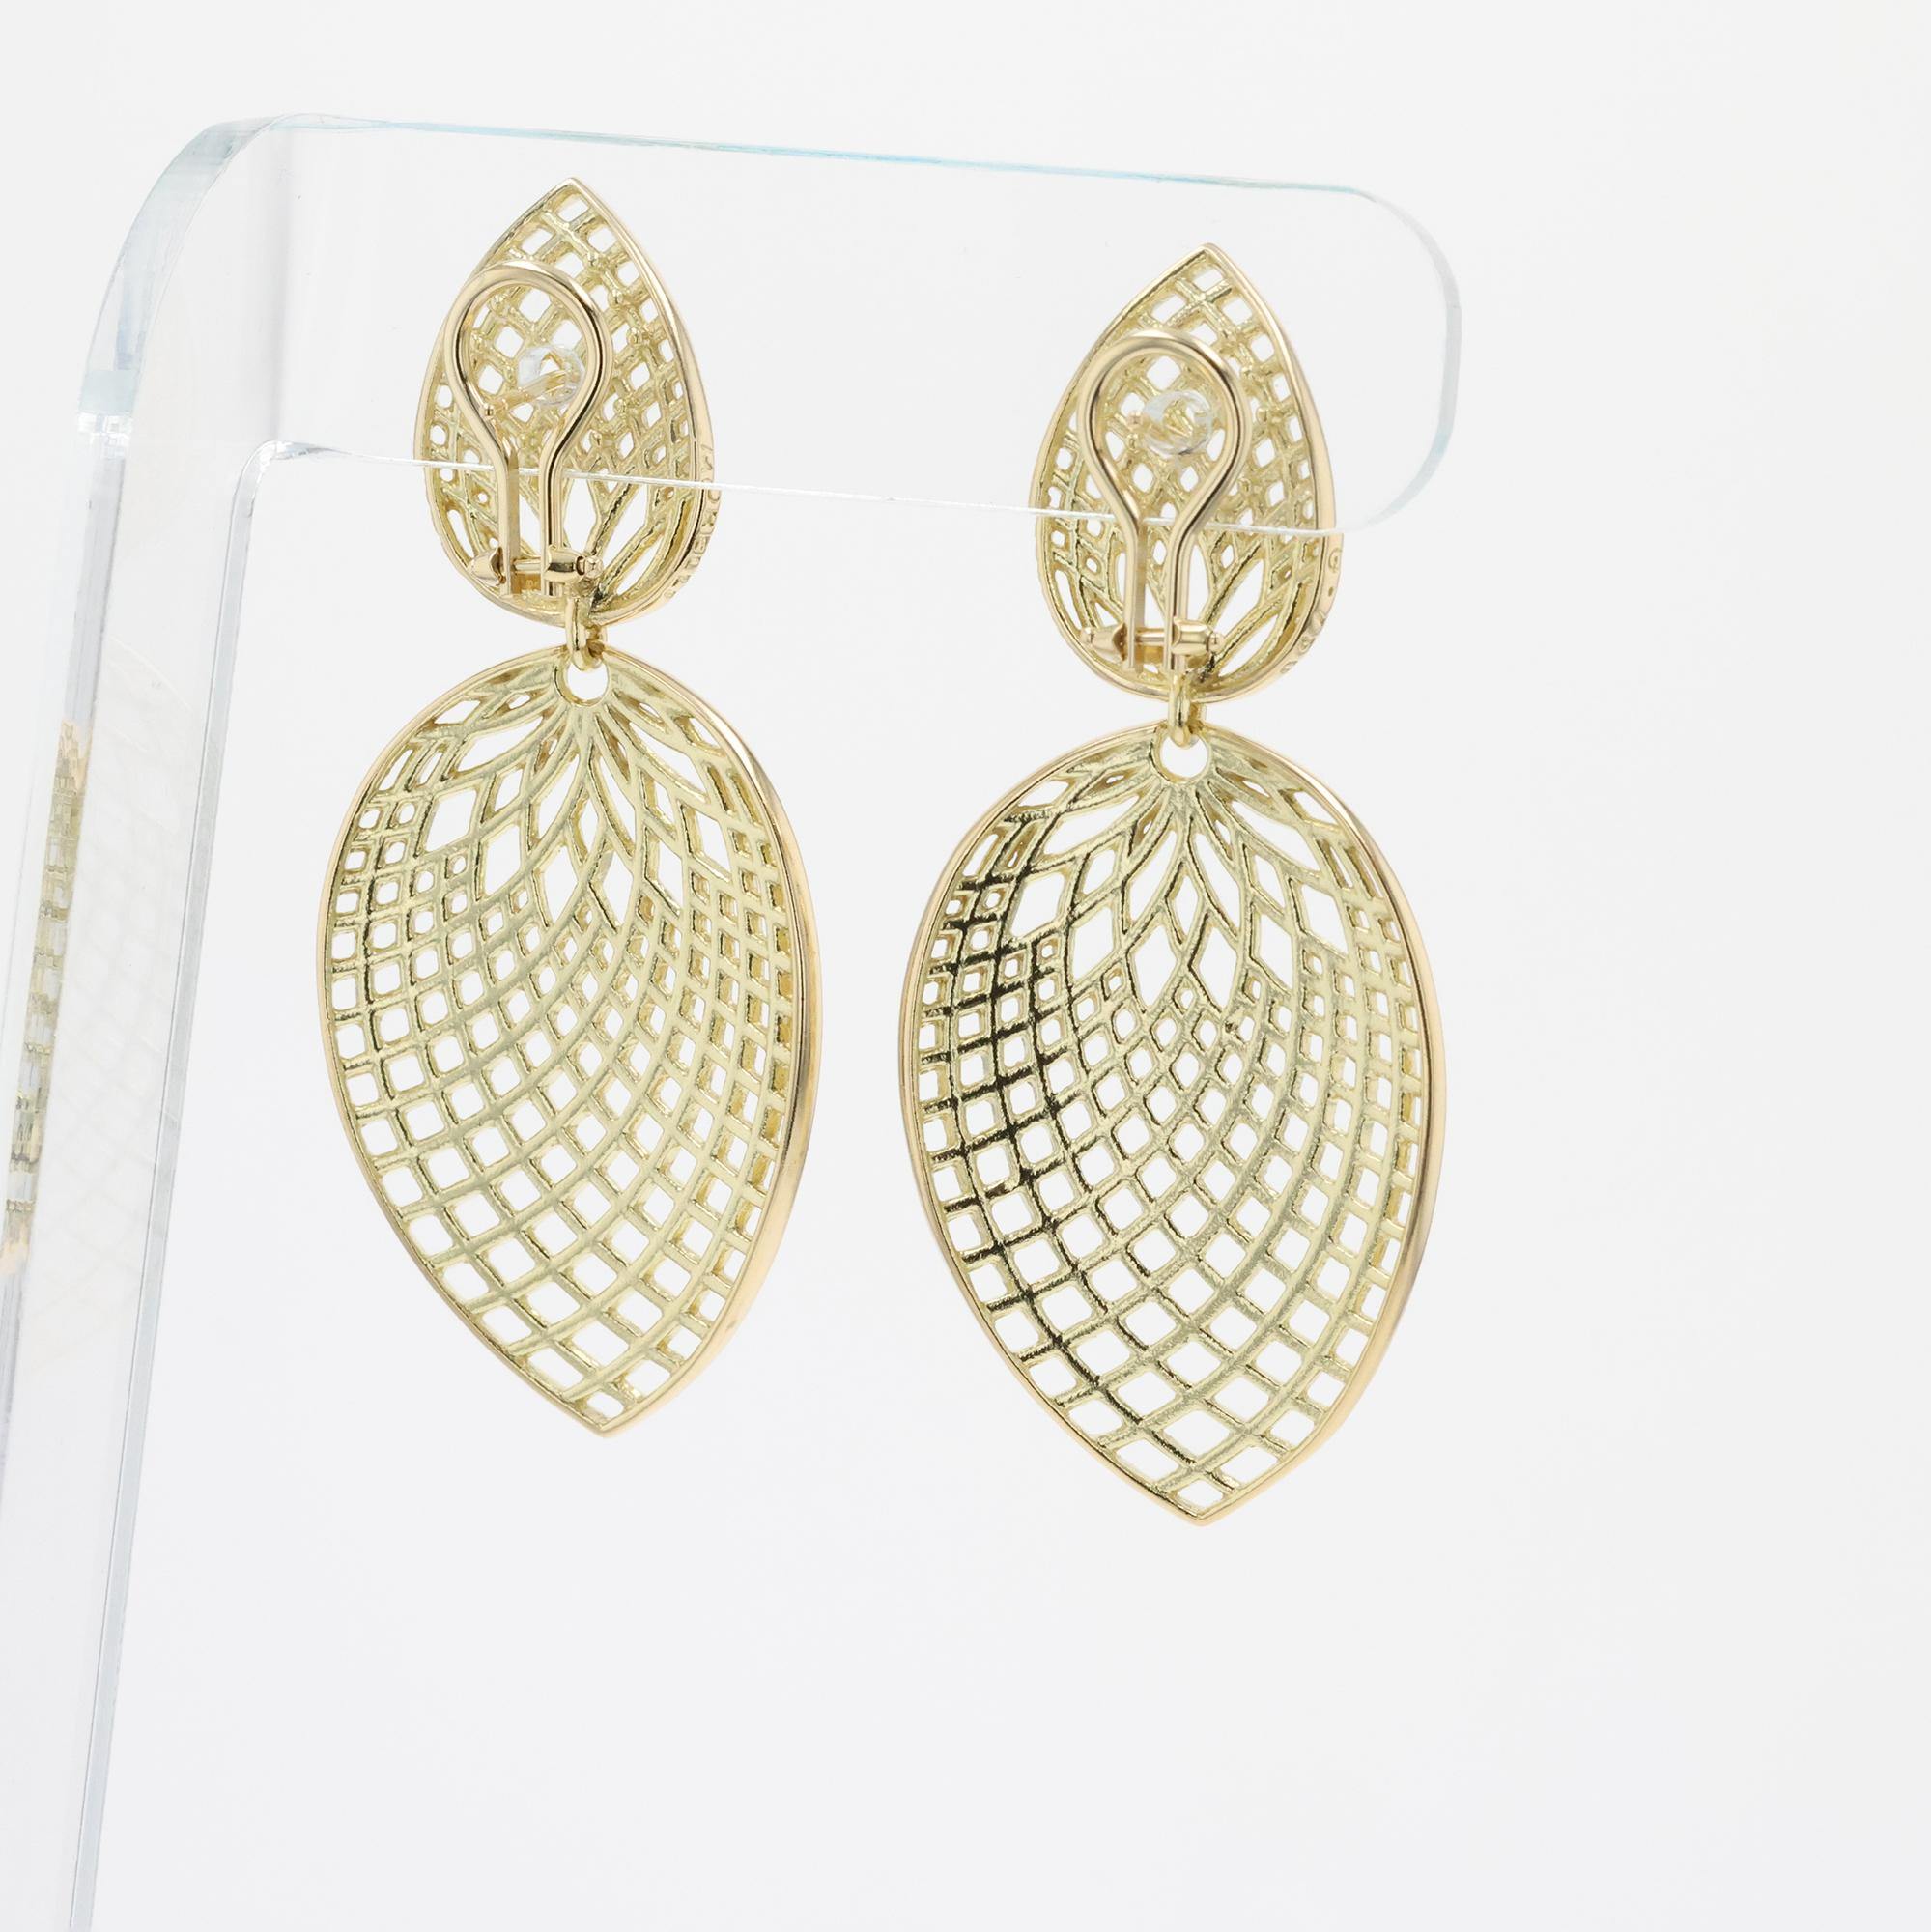 Vintage 18Yellow Gold Paul Morelli large gold spiral leaf earrings with leaf drop
and openwork spiral design with posts for pierced ears with Omega clip back for
balance and support. 